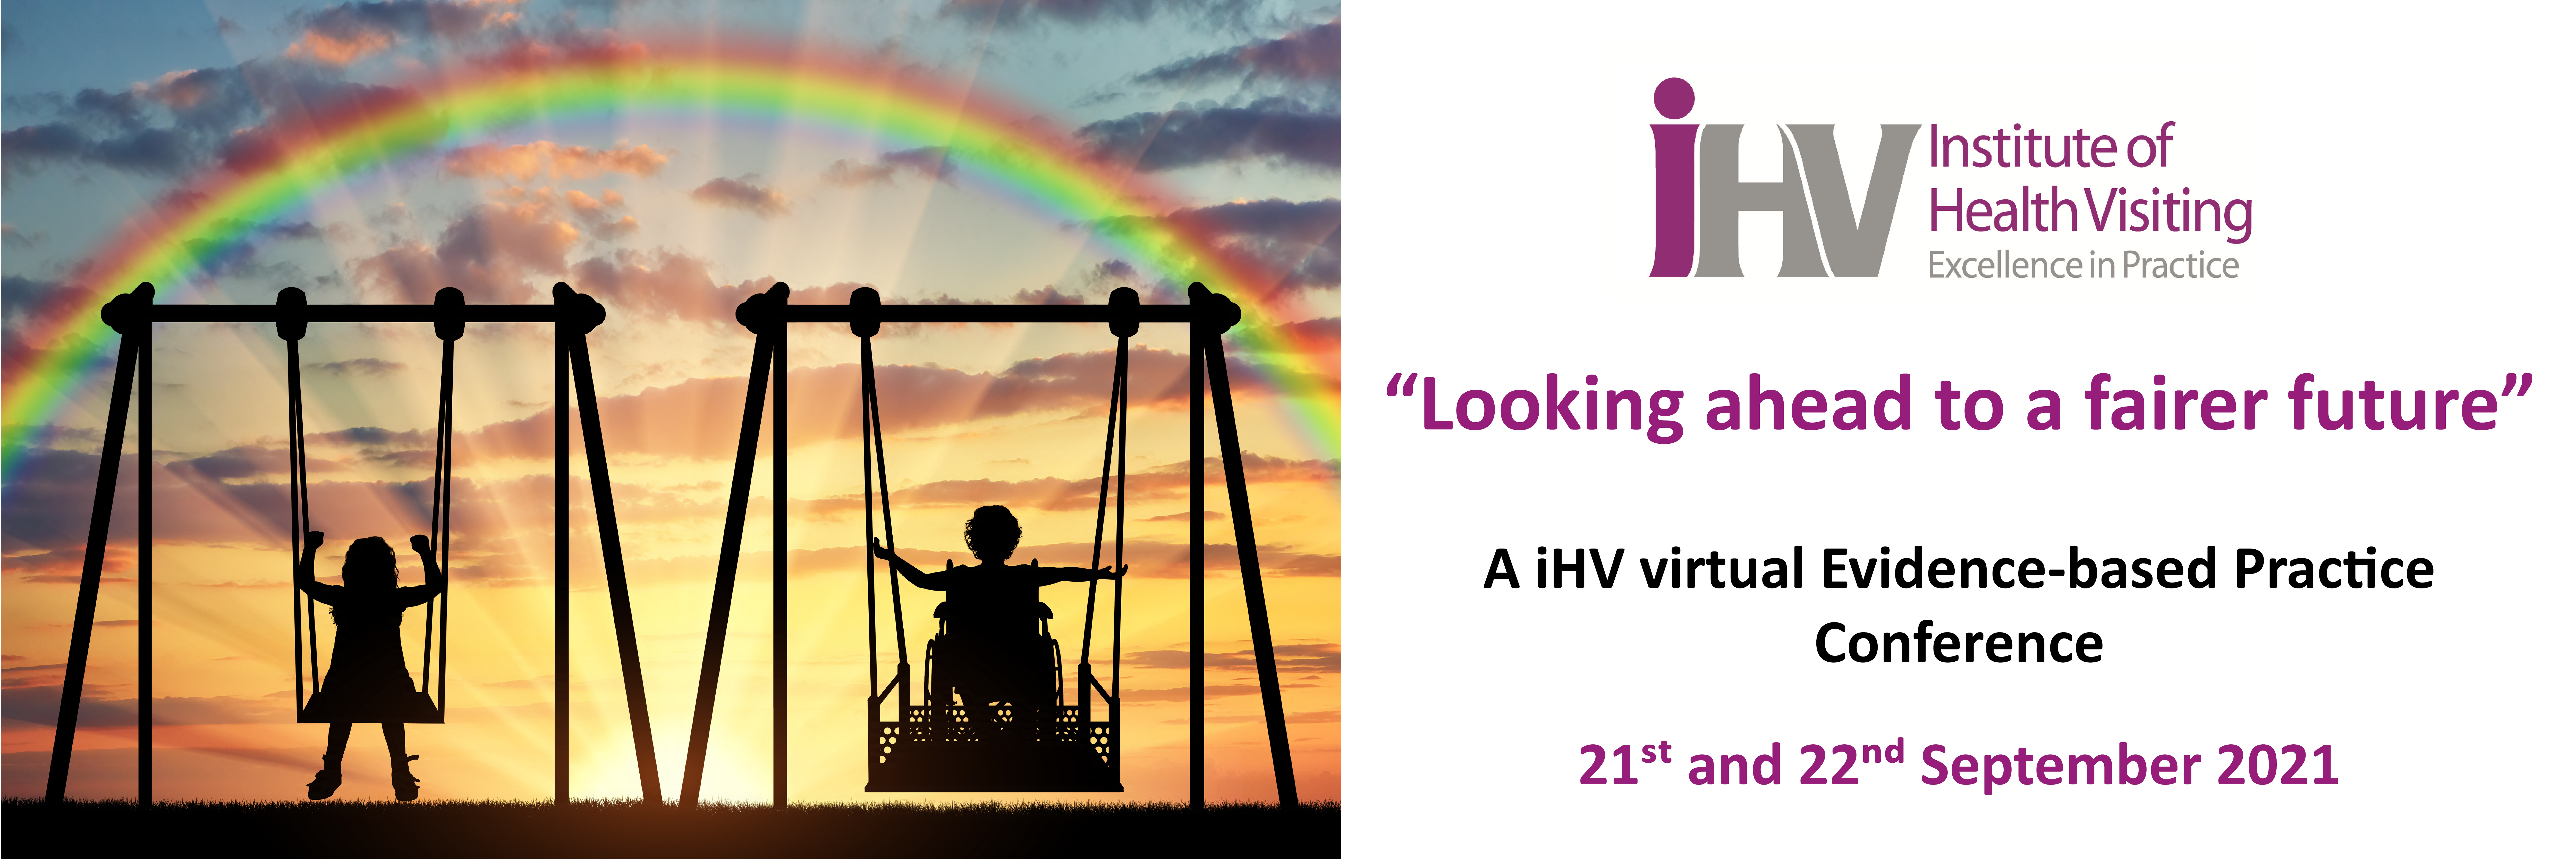 iHV Evidence-based Practice Conference: Looking ahead to a fairer future